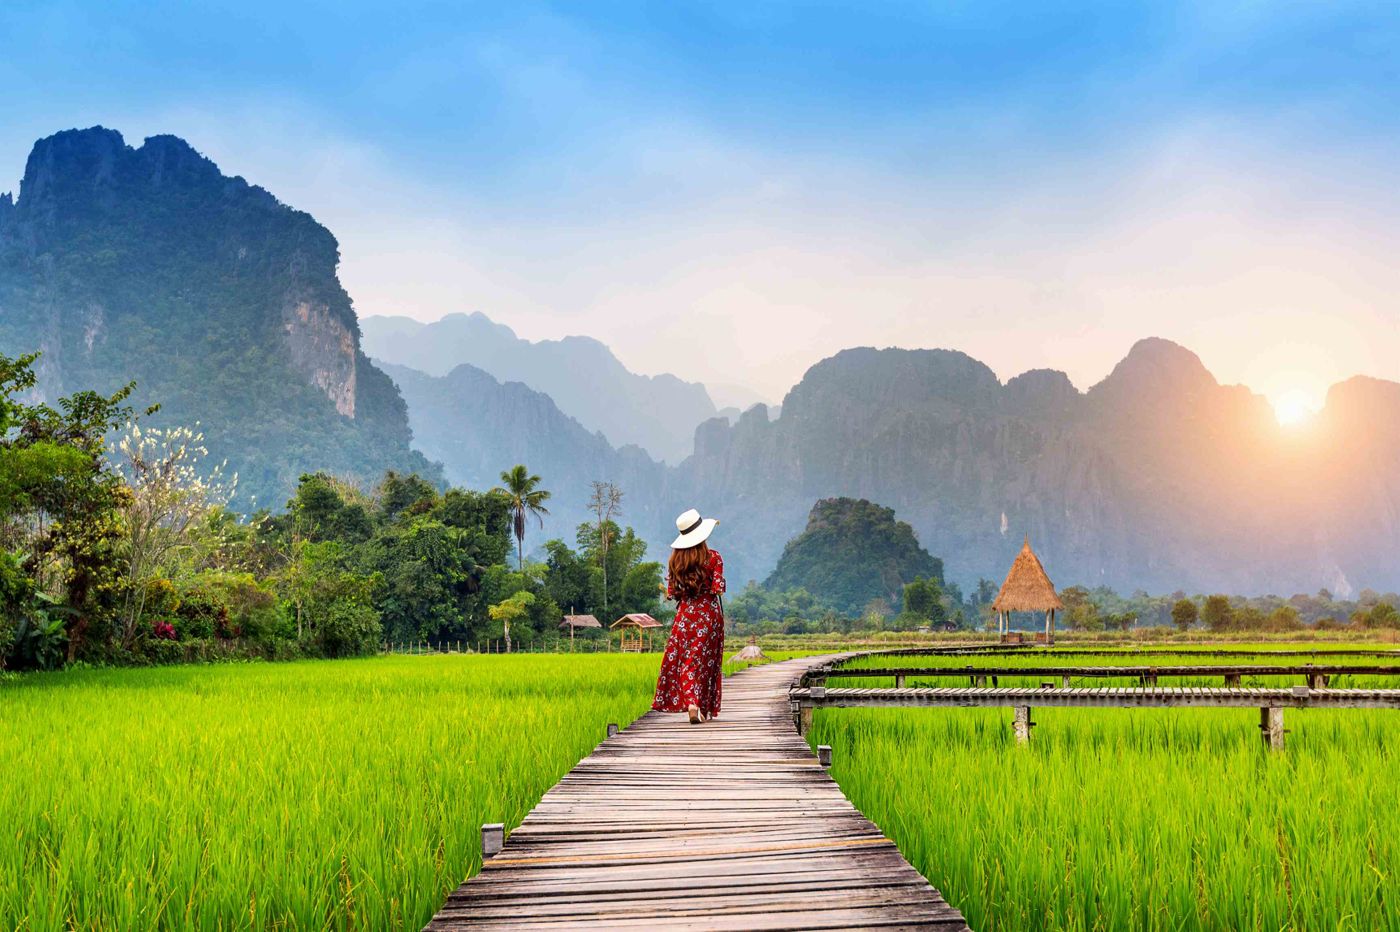 Most Interesting, Unusual and Fun Facts About Laos